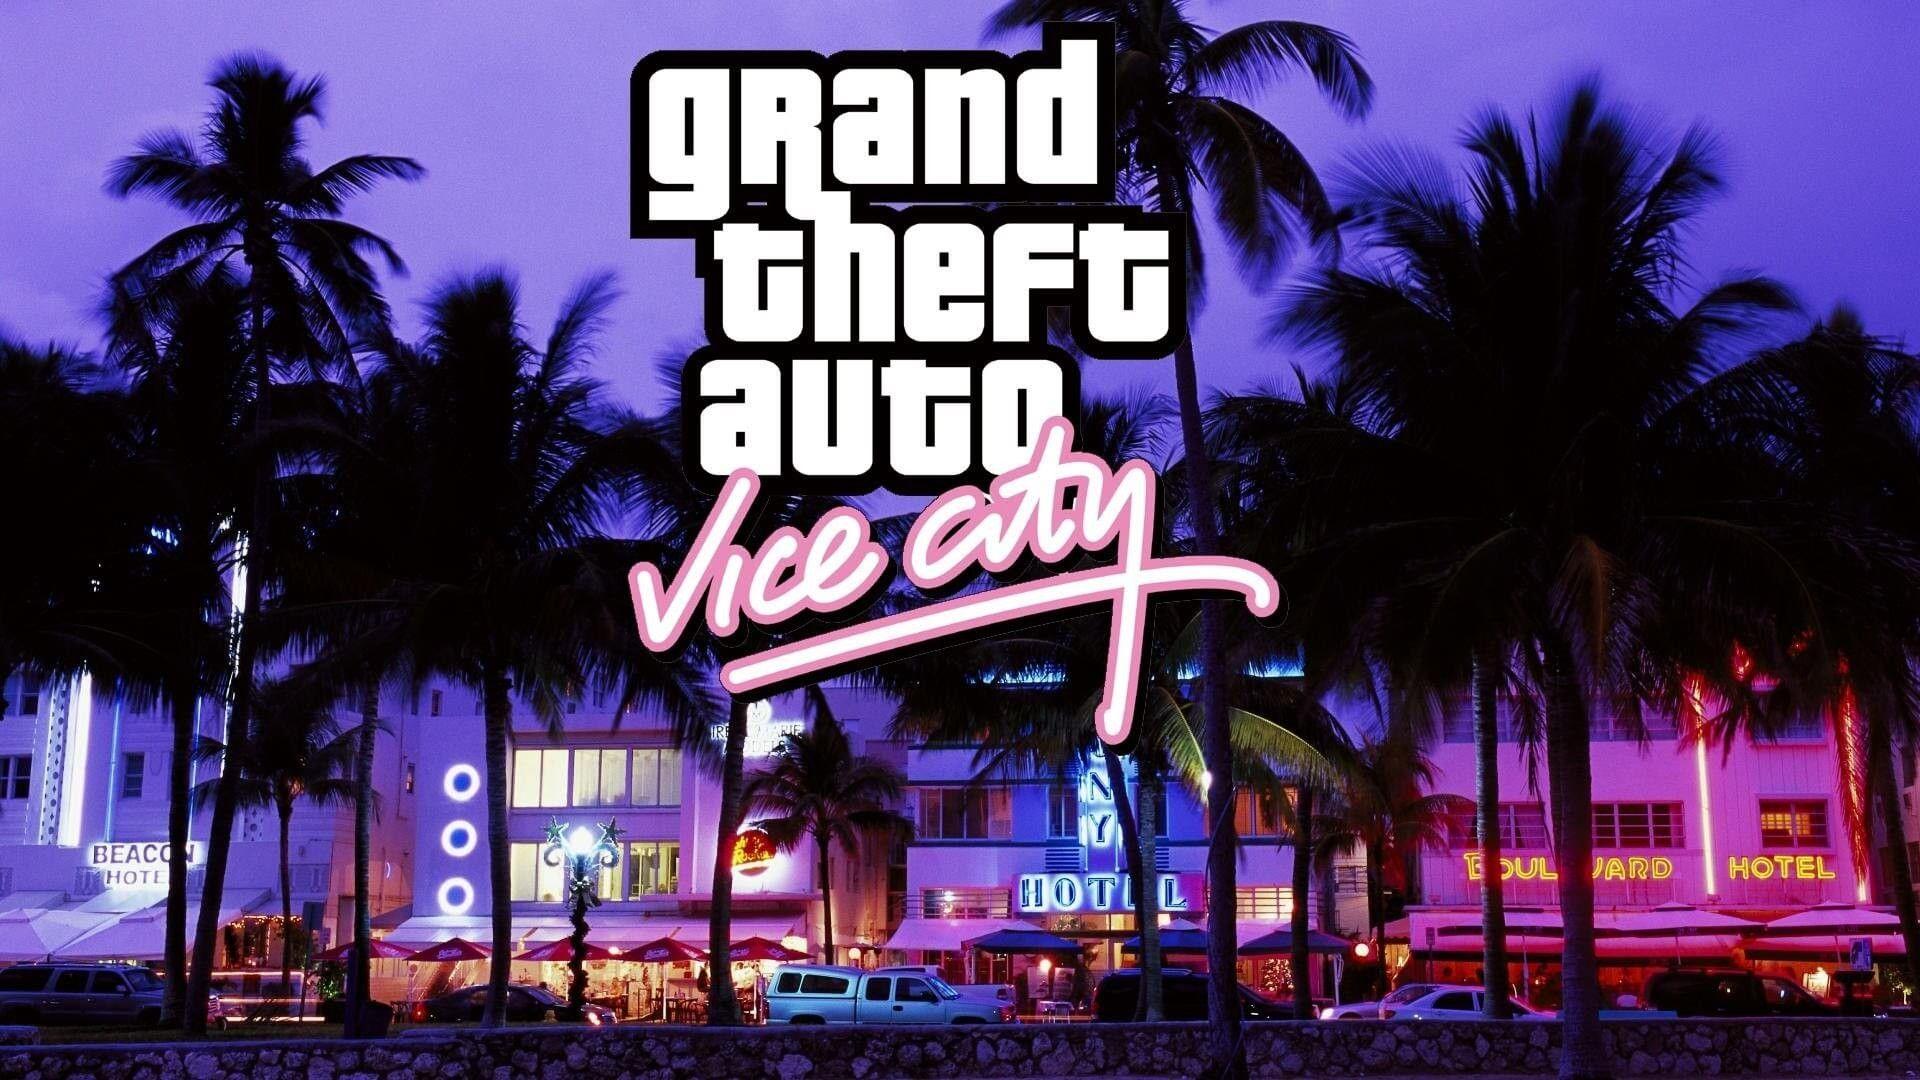 Grand Theft Auto: Vice City HD Wallpaper and Background Image